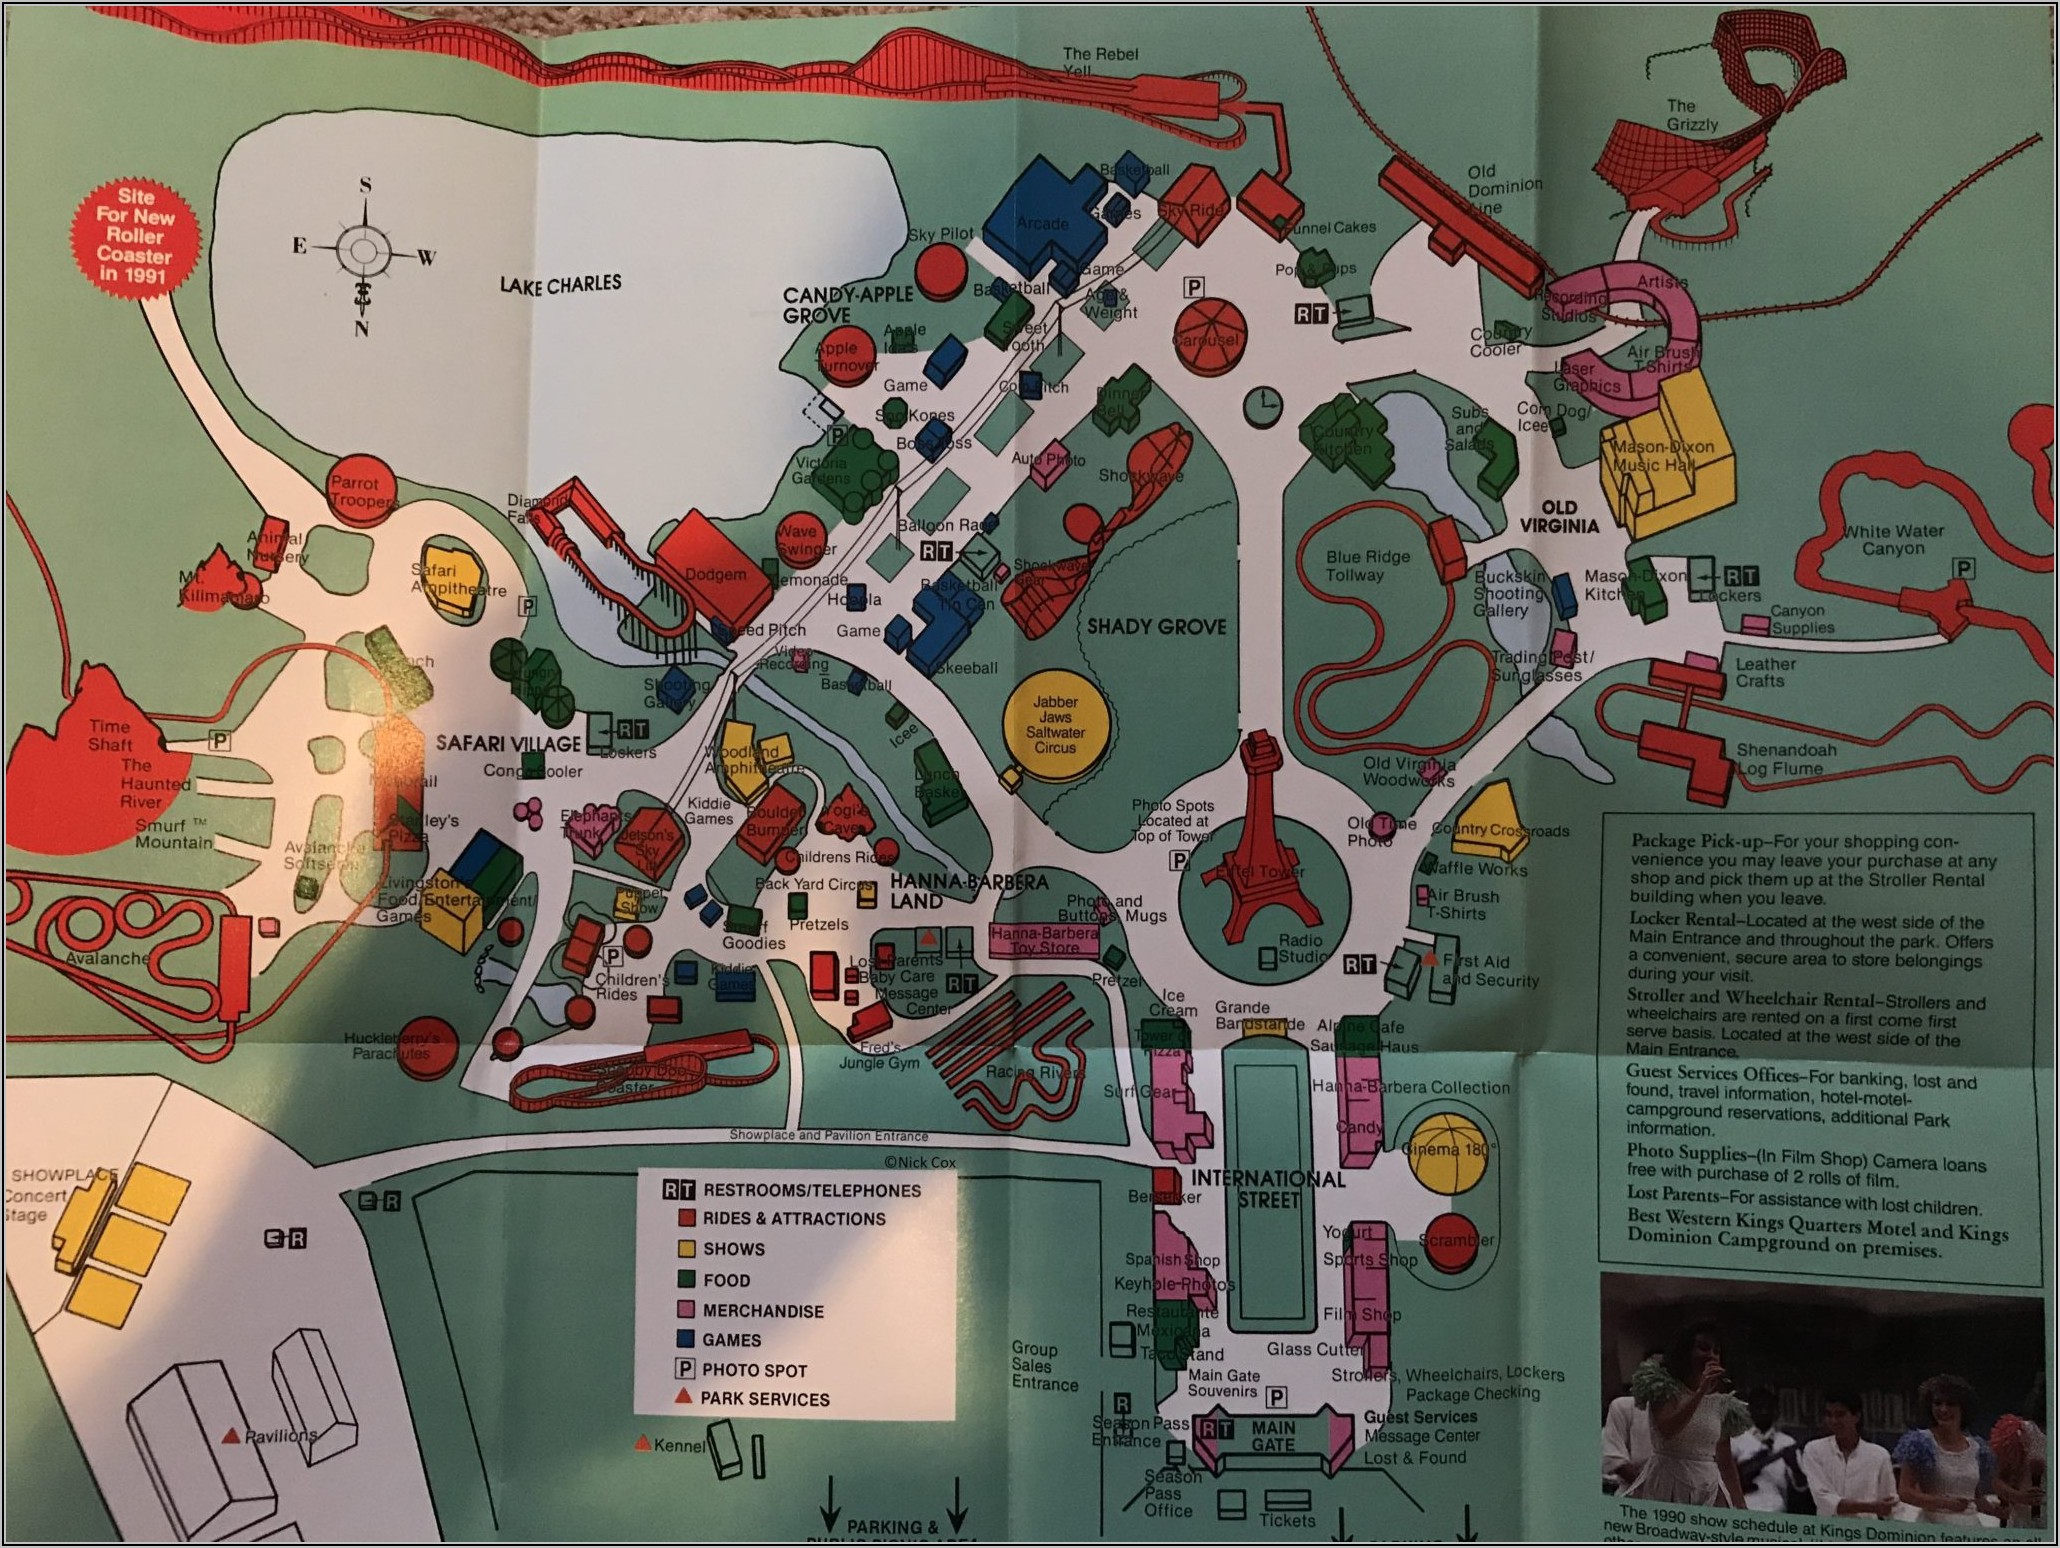 Kings Dominion Map 2019